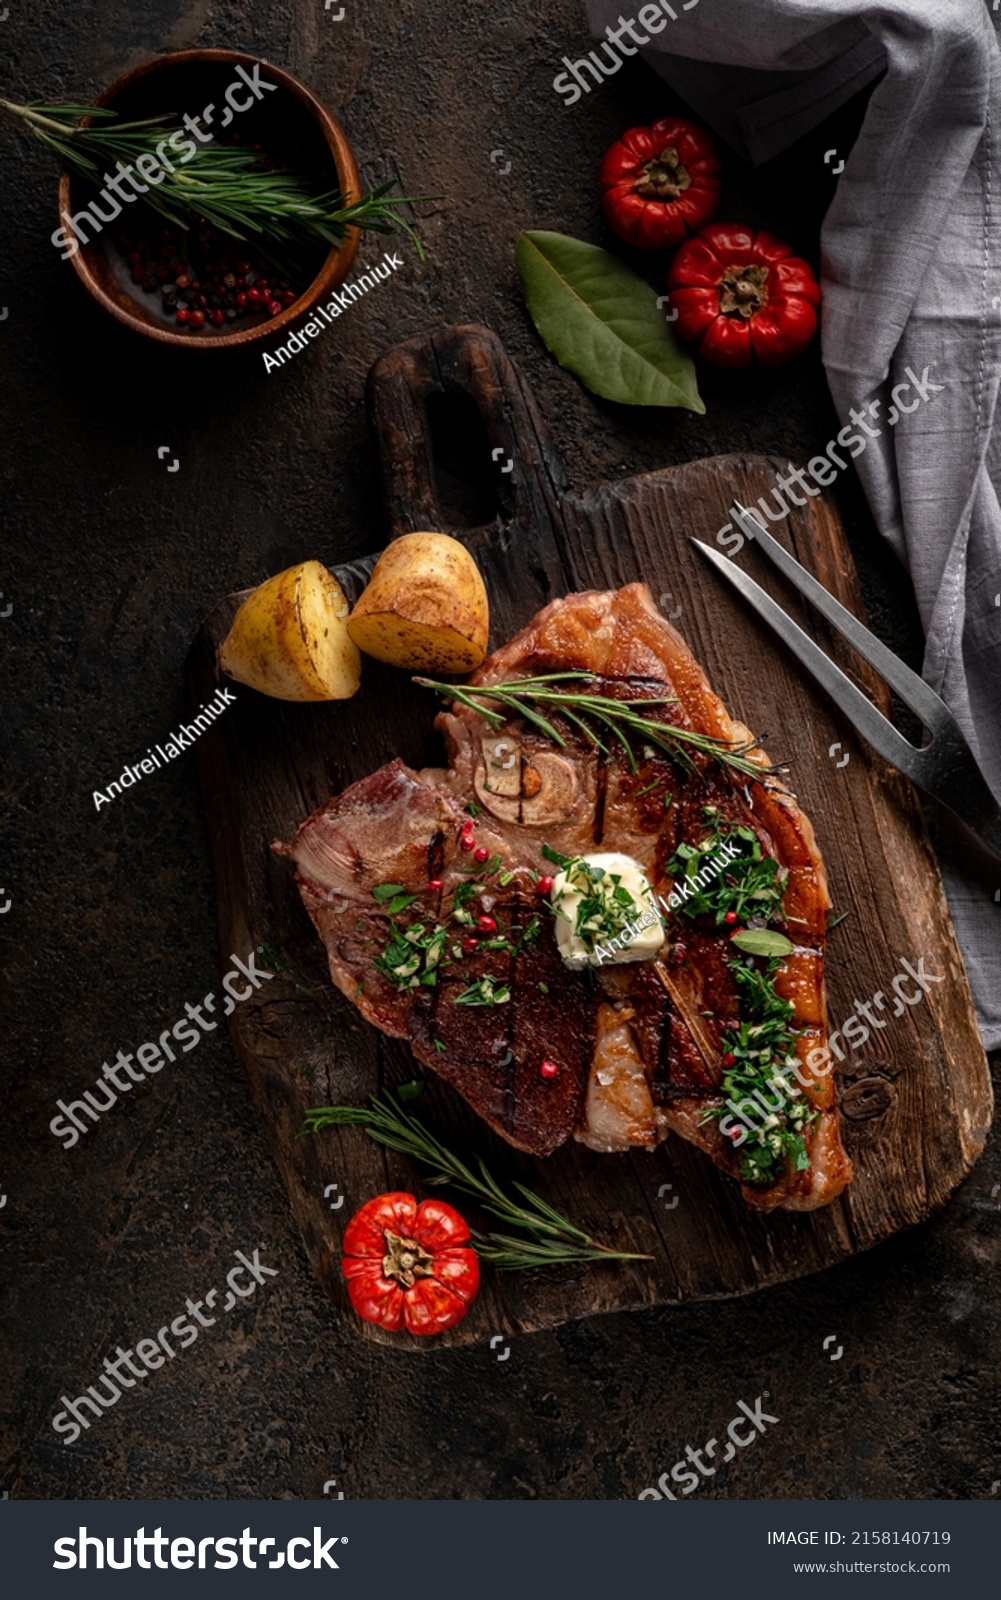 Porterhouse roast steak or Florentine beef steak with butter on a cutting board with seasonings and vegetables. Dark rustic wooden background. View from above. #2158140719